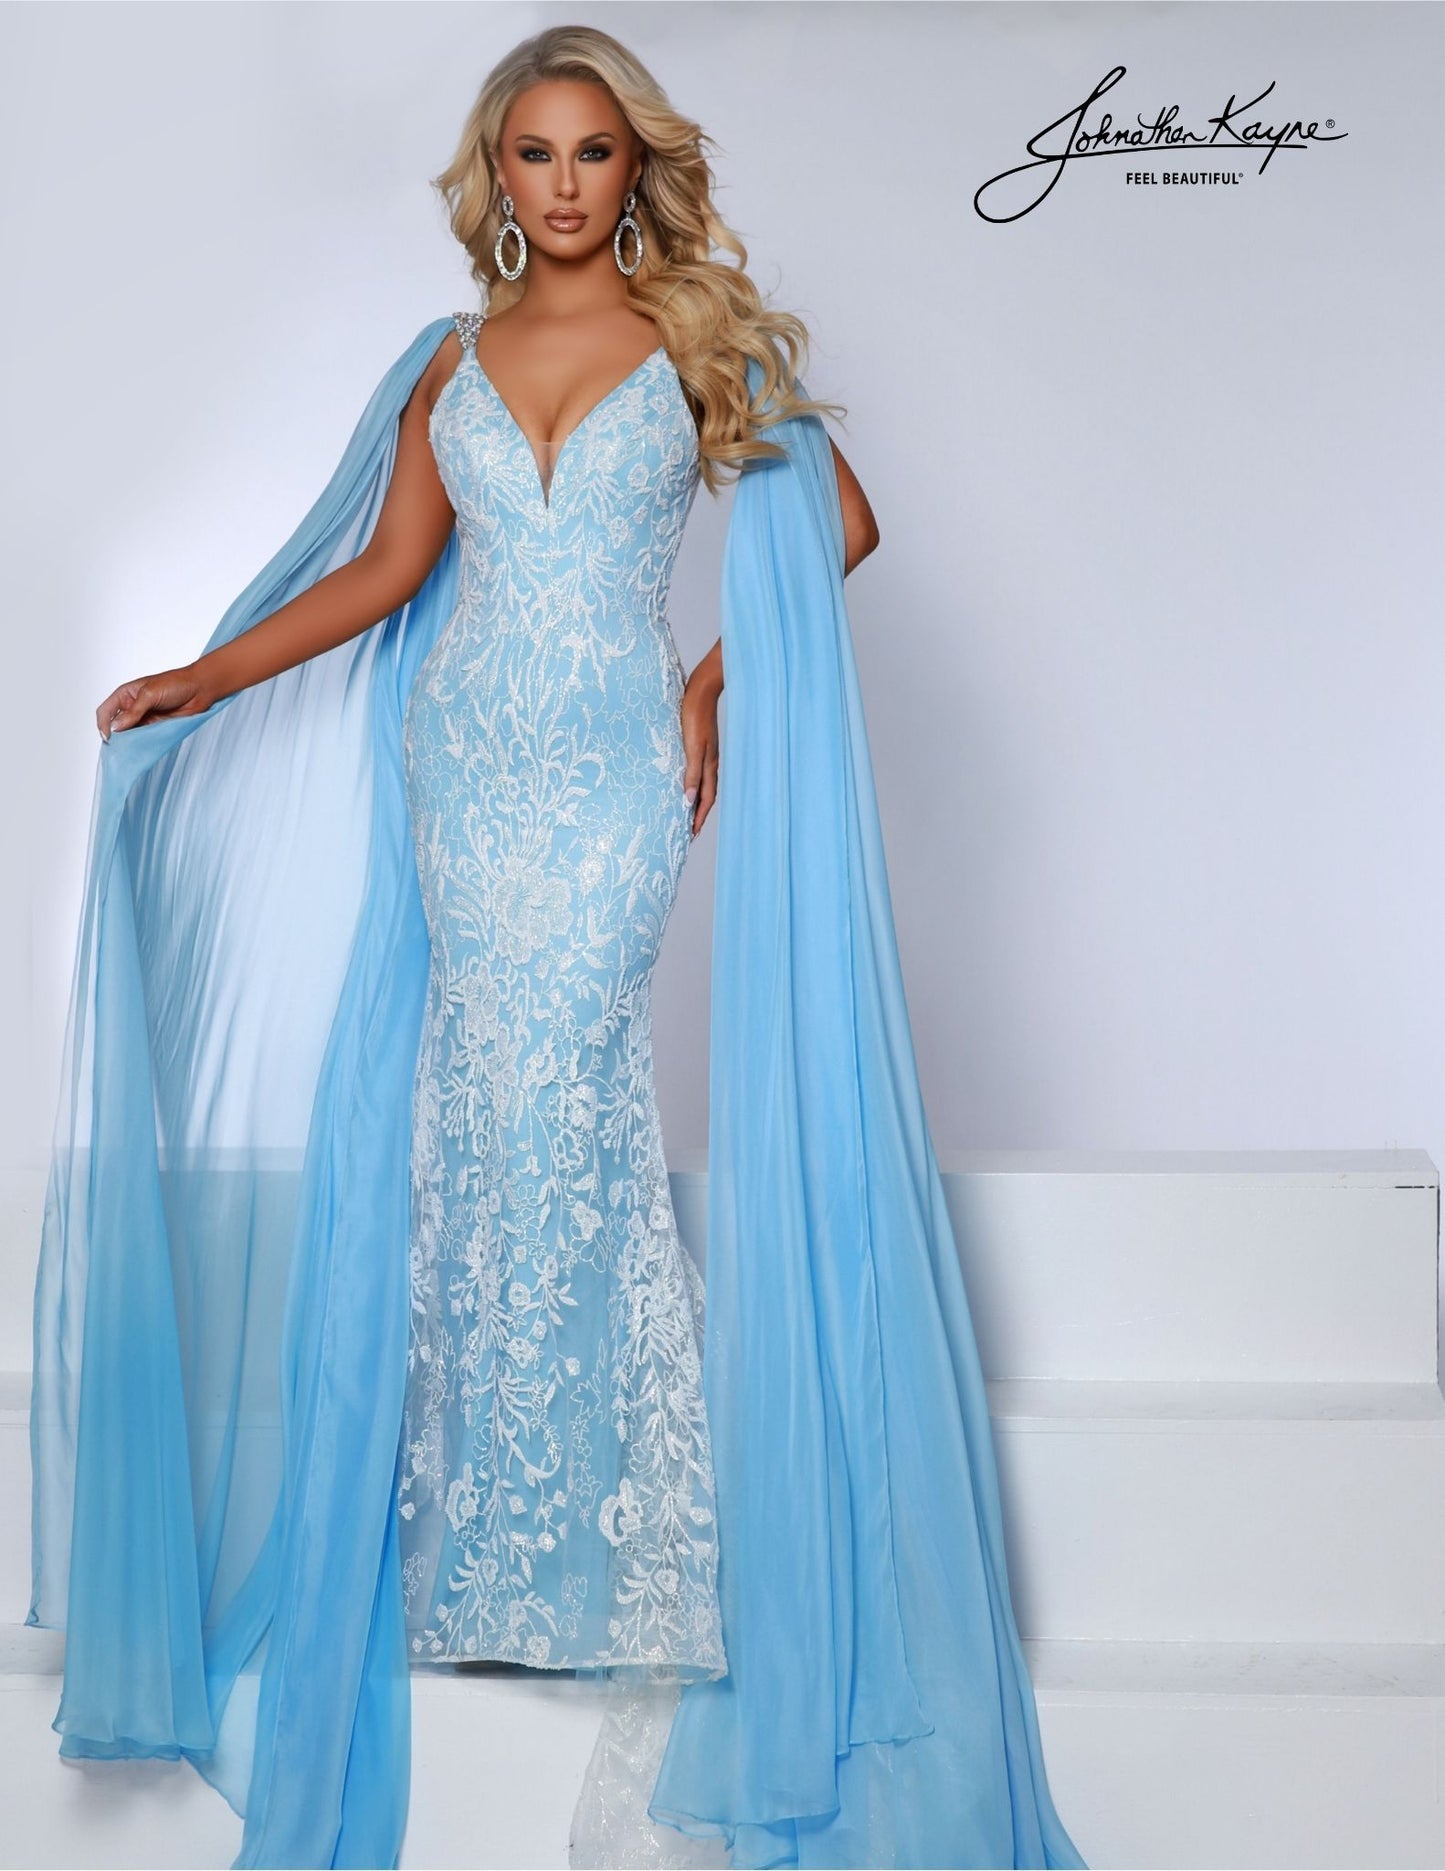 The Johnathan Kayne 2826 Long Prom Dress is a stunning choice for any special event. Its fitted sparkly mesh bodice and chiffon shoulder drapes give it a formal look, perfect for any pageant. It's sure to make you feel gorgeous for your special night. Drape yourself in elegance with our Sparkly Mesh Gown. The Fit and Flare Silhouette, complete with shimmering details and graceful chiffon shoulder drapes, is the perfect choice for a memorable prom night.